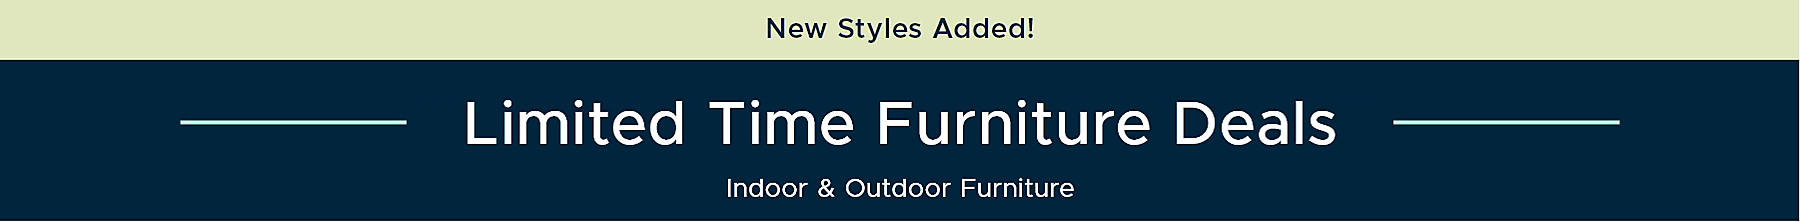 New Styles Added! Limited Time Furniture Deals Indoor & Outdoor Furniture